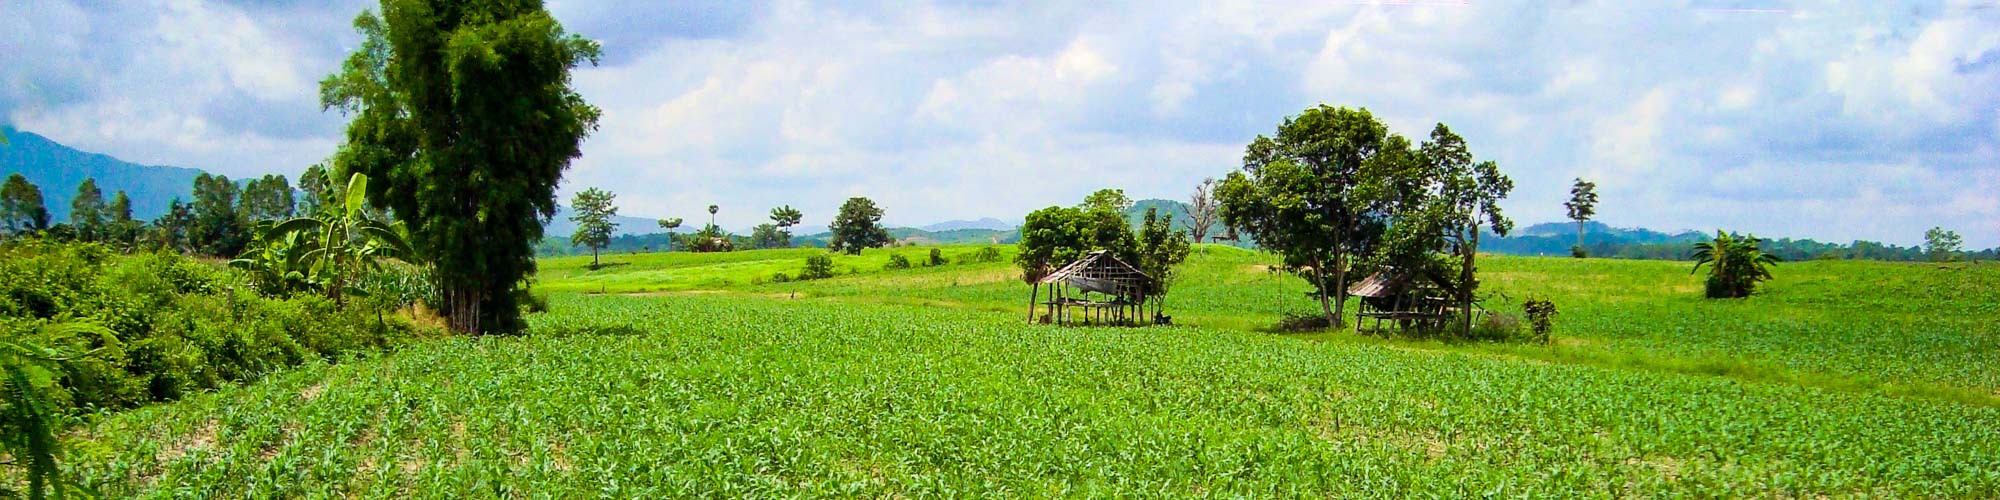 Chiang Saen, Chiang Rai, Thailand: Commercial land near town and transport routes